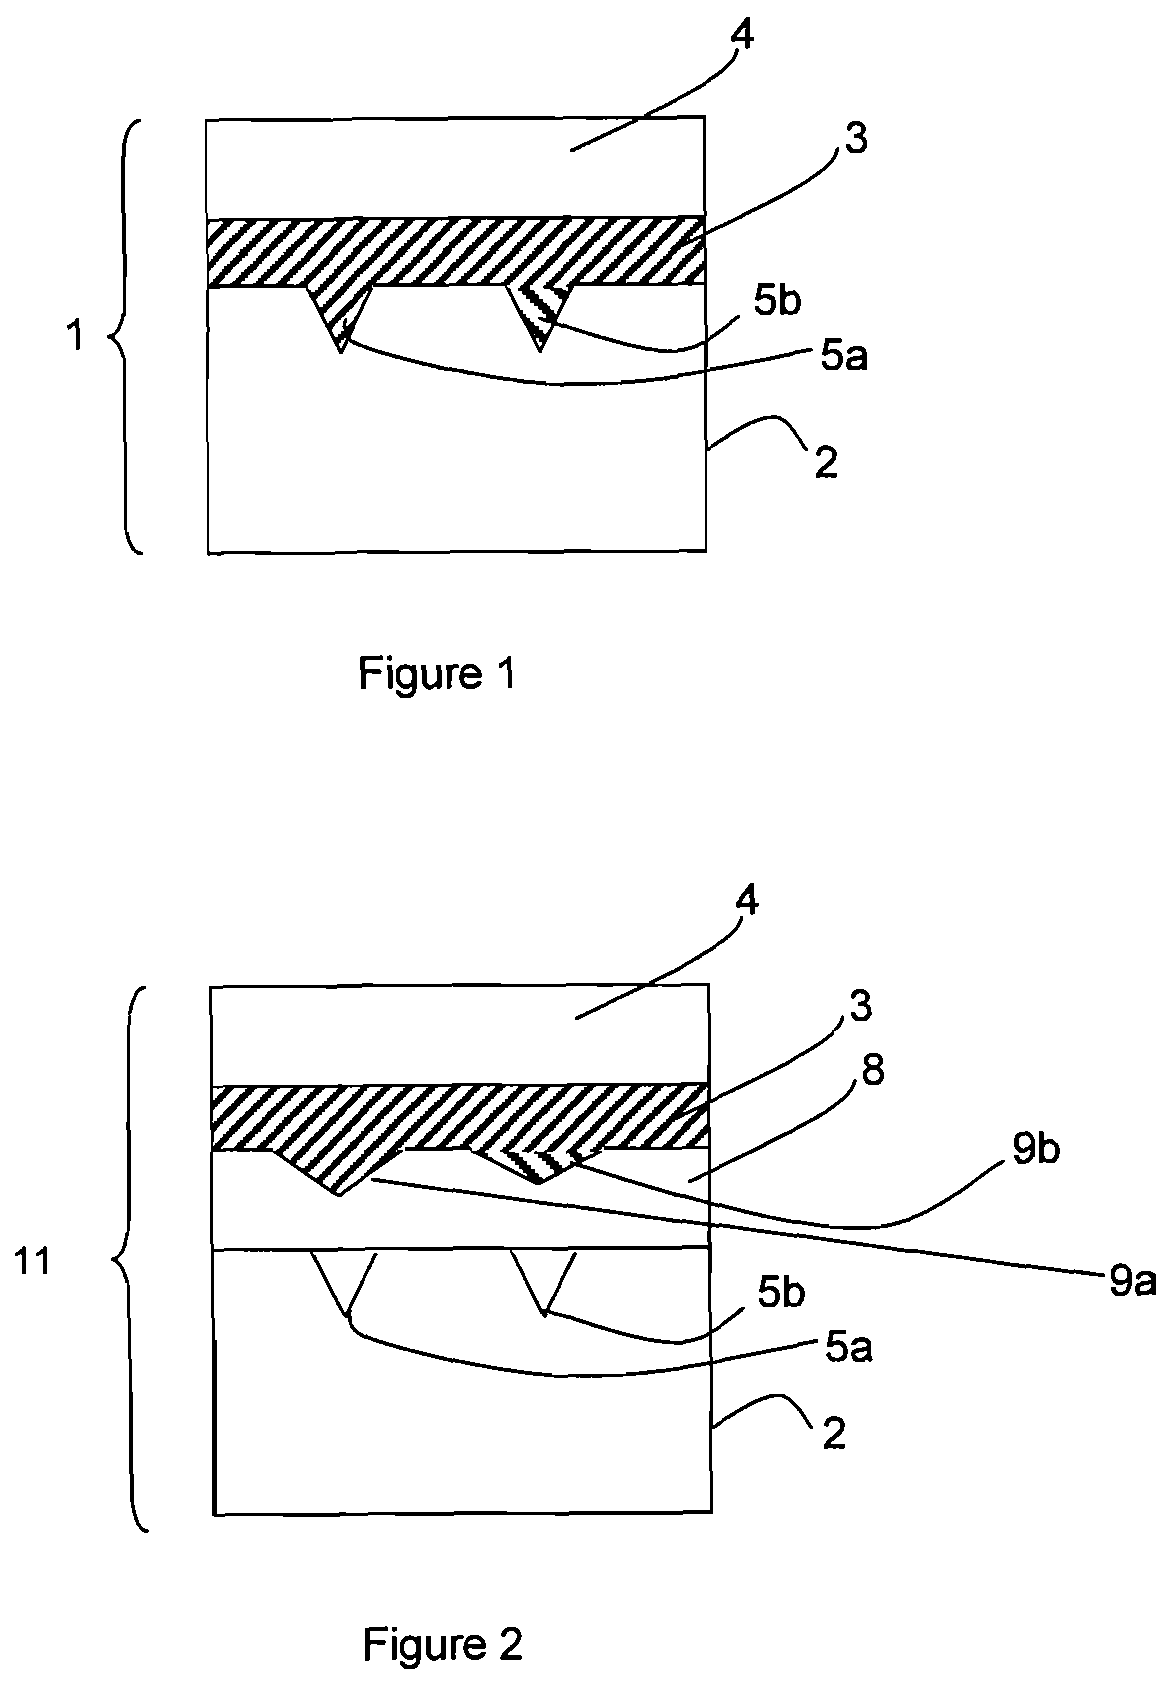 Low cost substrates and method of forming such substrates